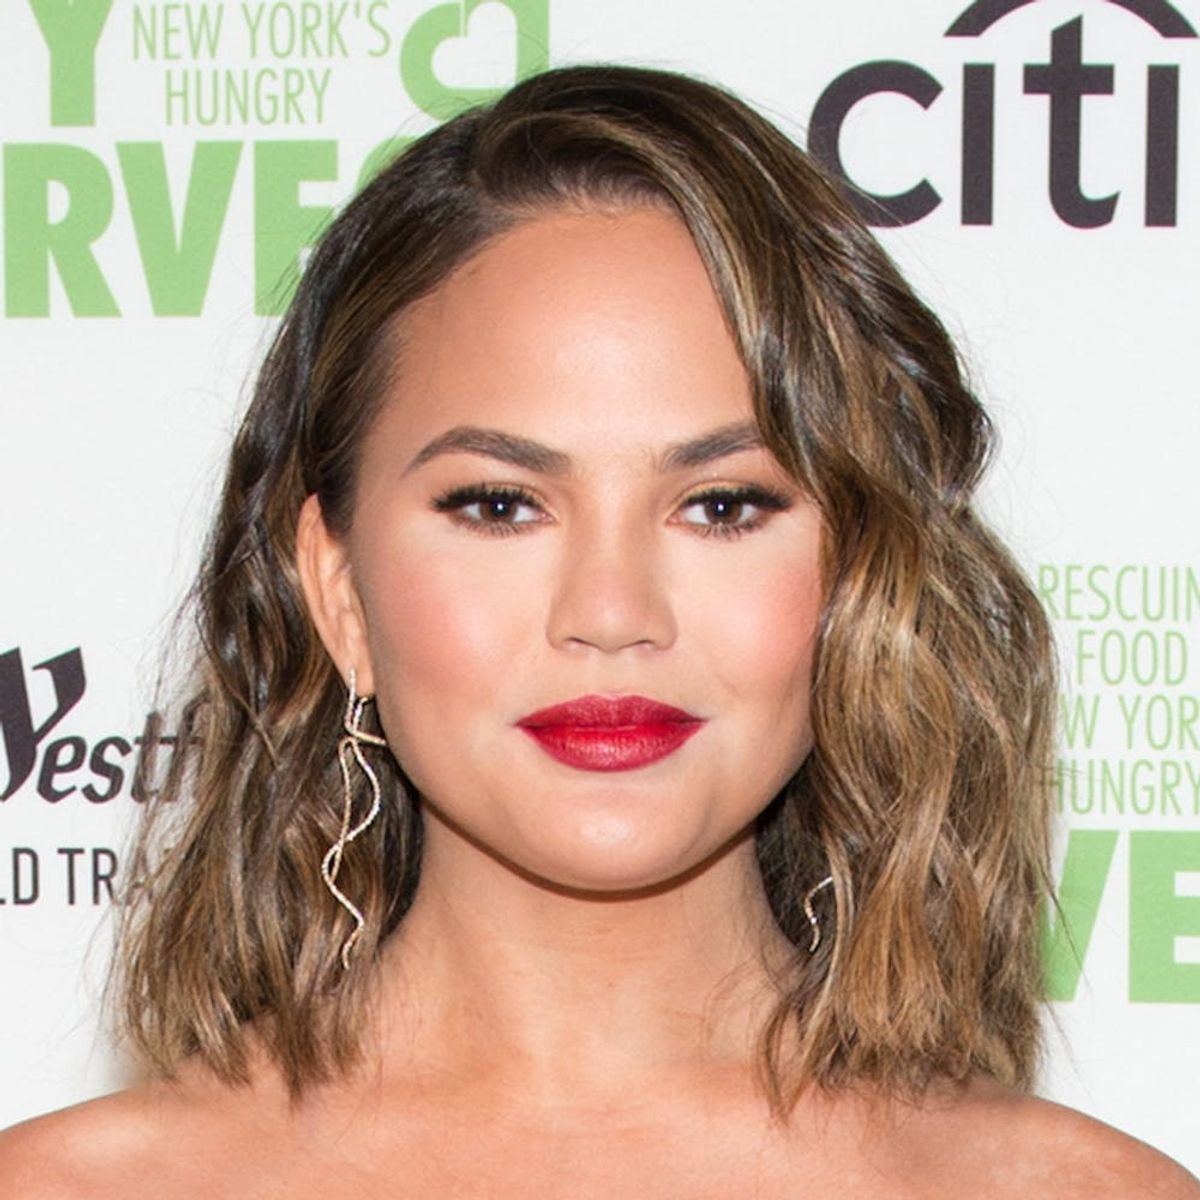 Two Out of Three Moms Have This in Common With Chrissy Teigen